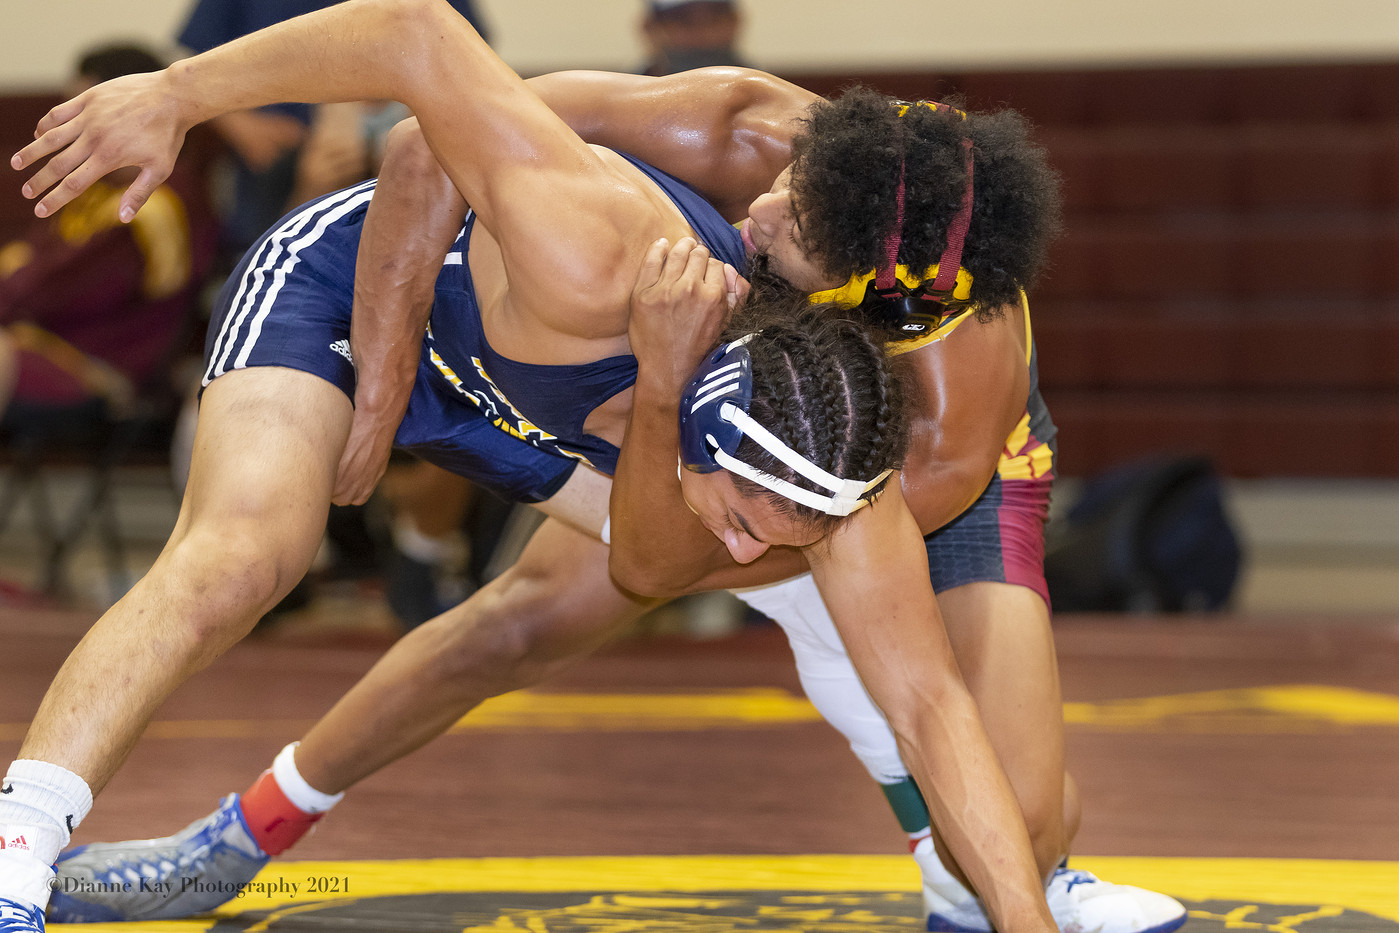 City goes 3-2 at the Simpson Duals with wins against Washington State, Umpqua and Shasta